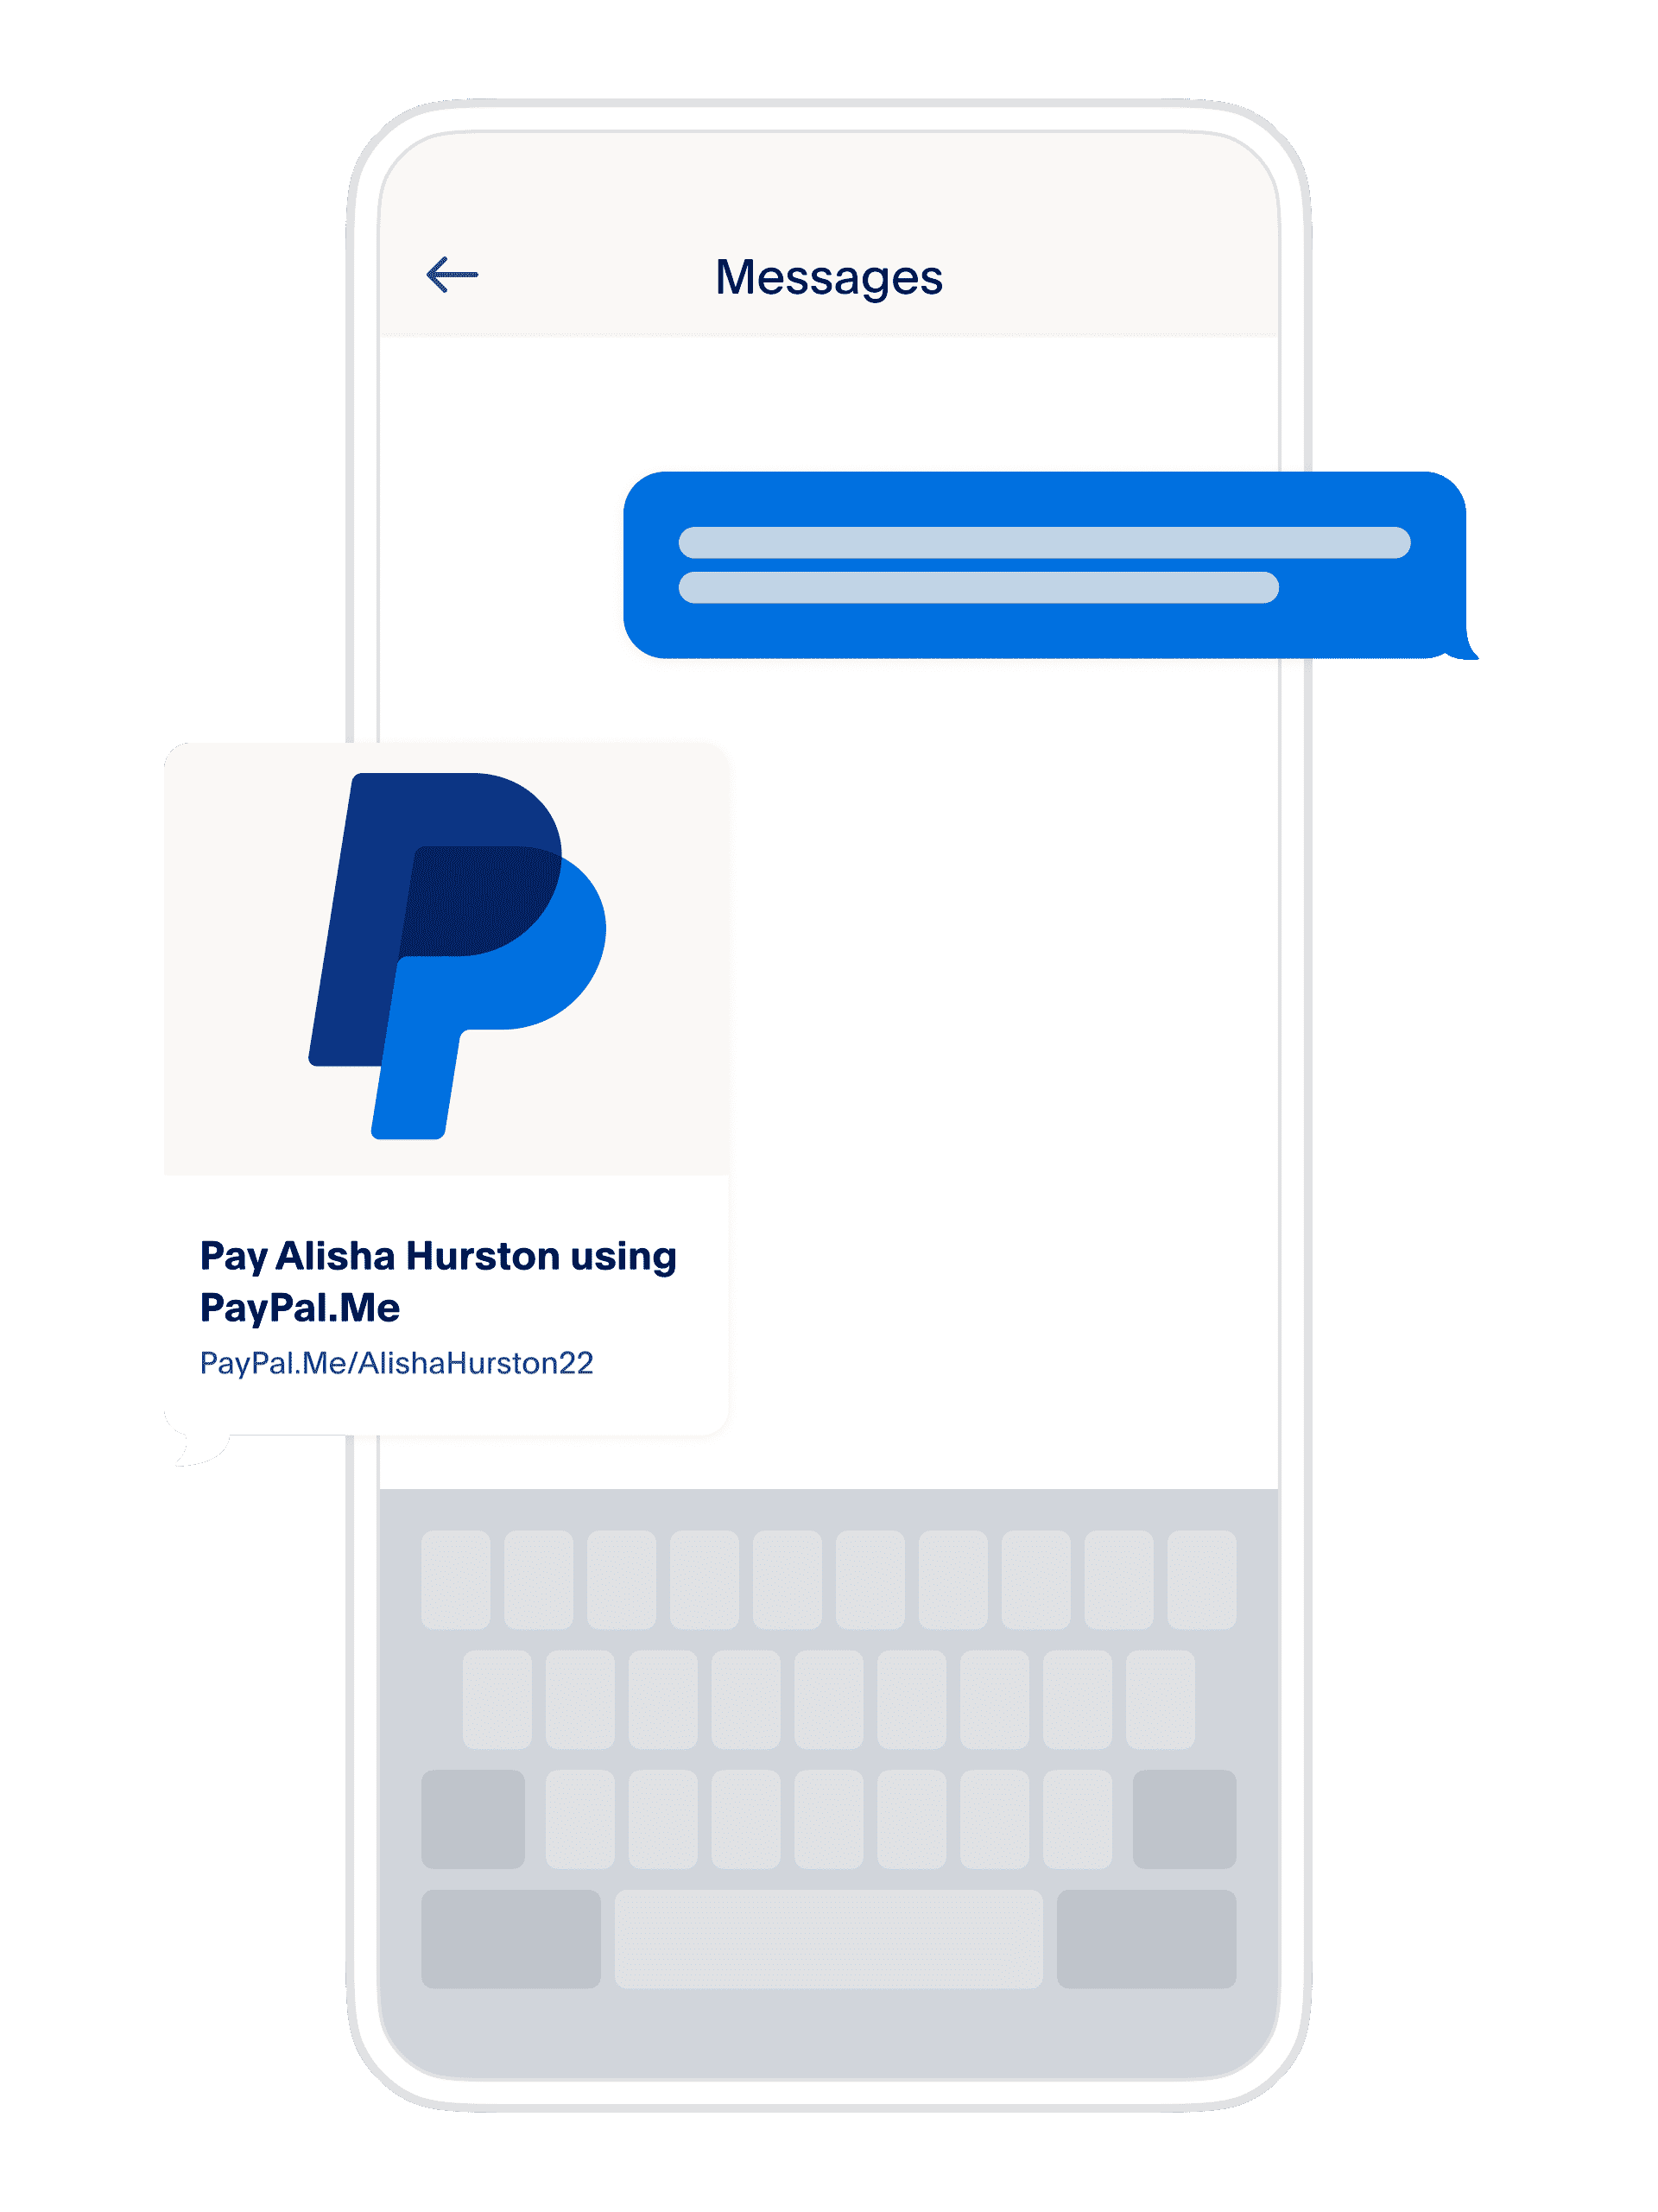 Mining Data at PayPal to Guide Business Strategy